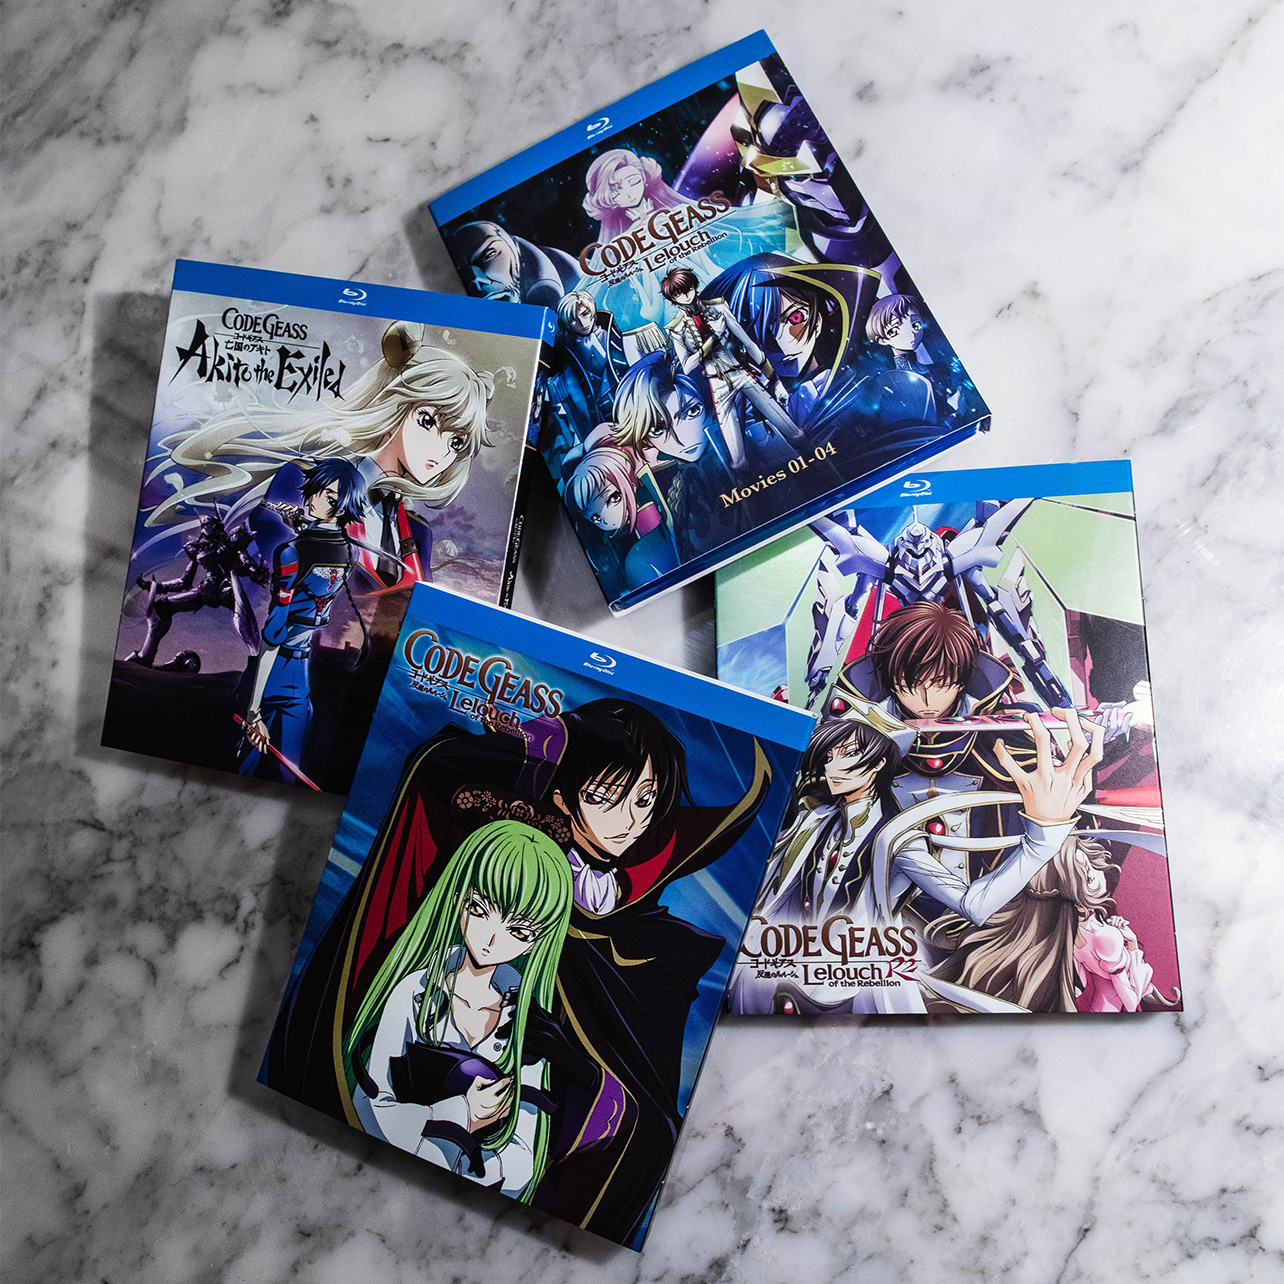  Code Geass: Lelouch of the Rebellion: Complete Series  Collection (Episodes 1-50) - Blu-ray : Movies & TV